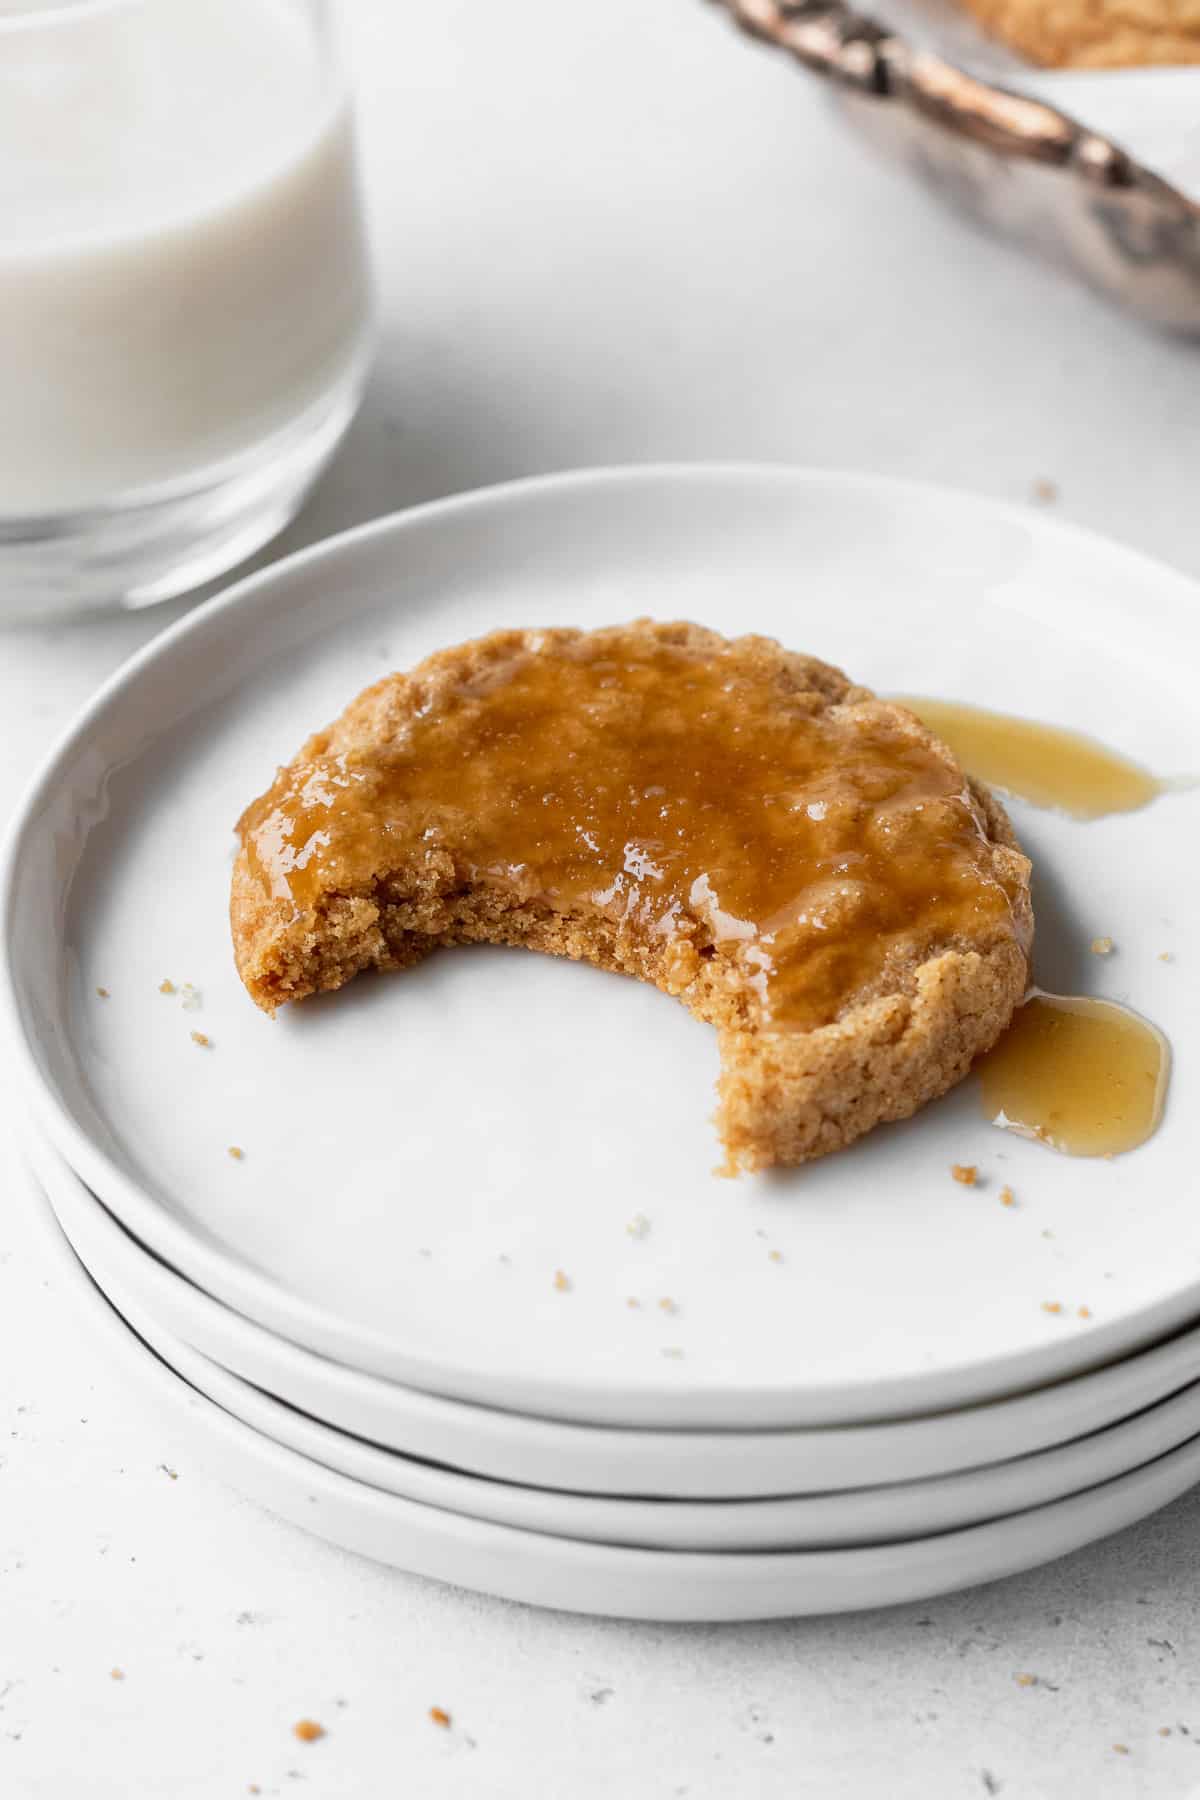 A bitten ginger cookie with a bite taken out on a white plate.